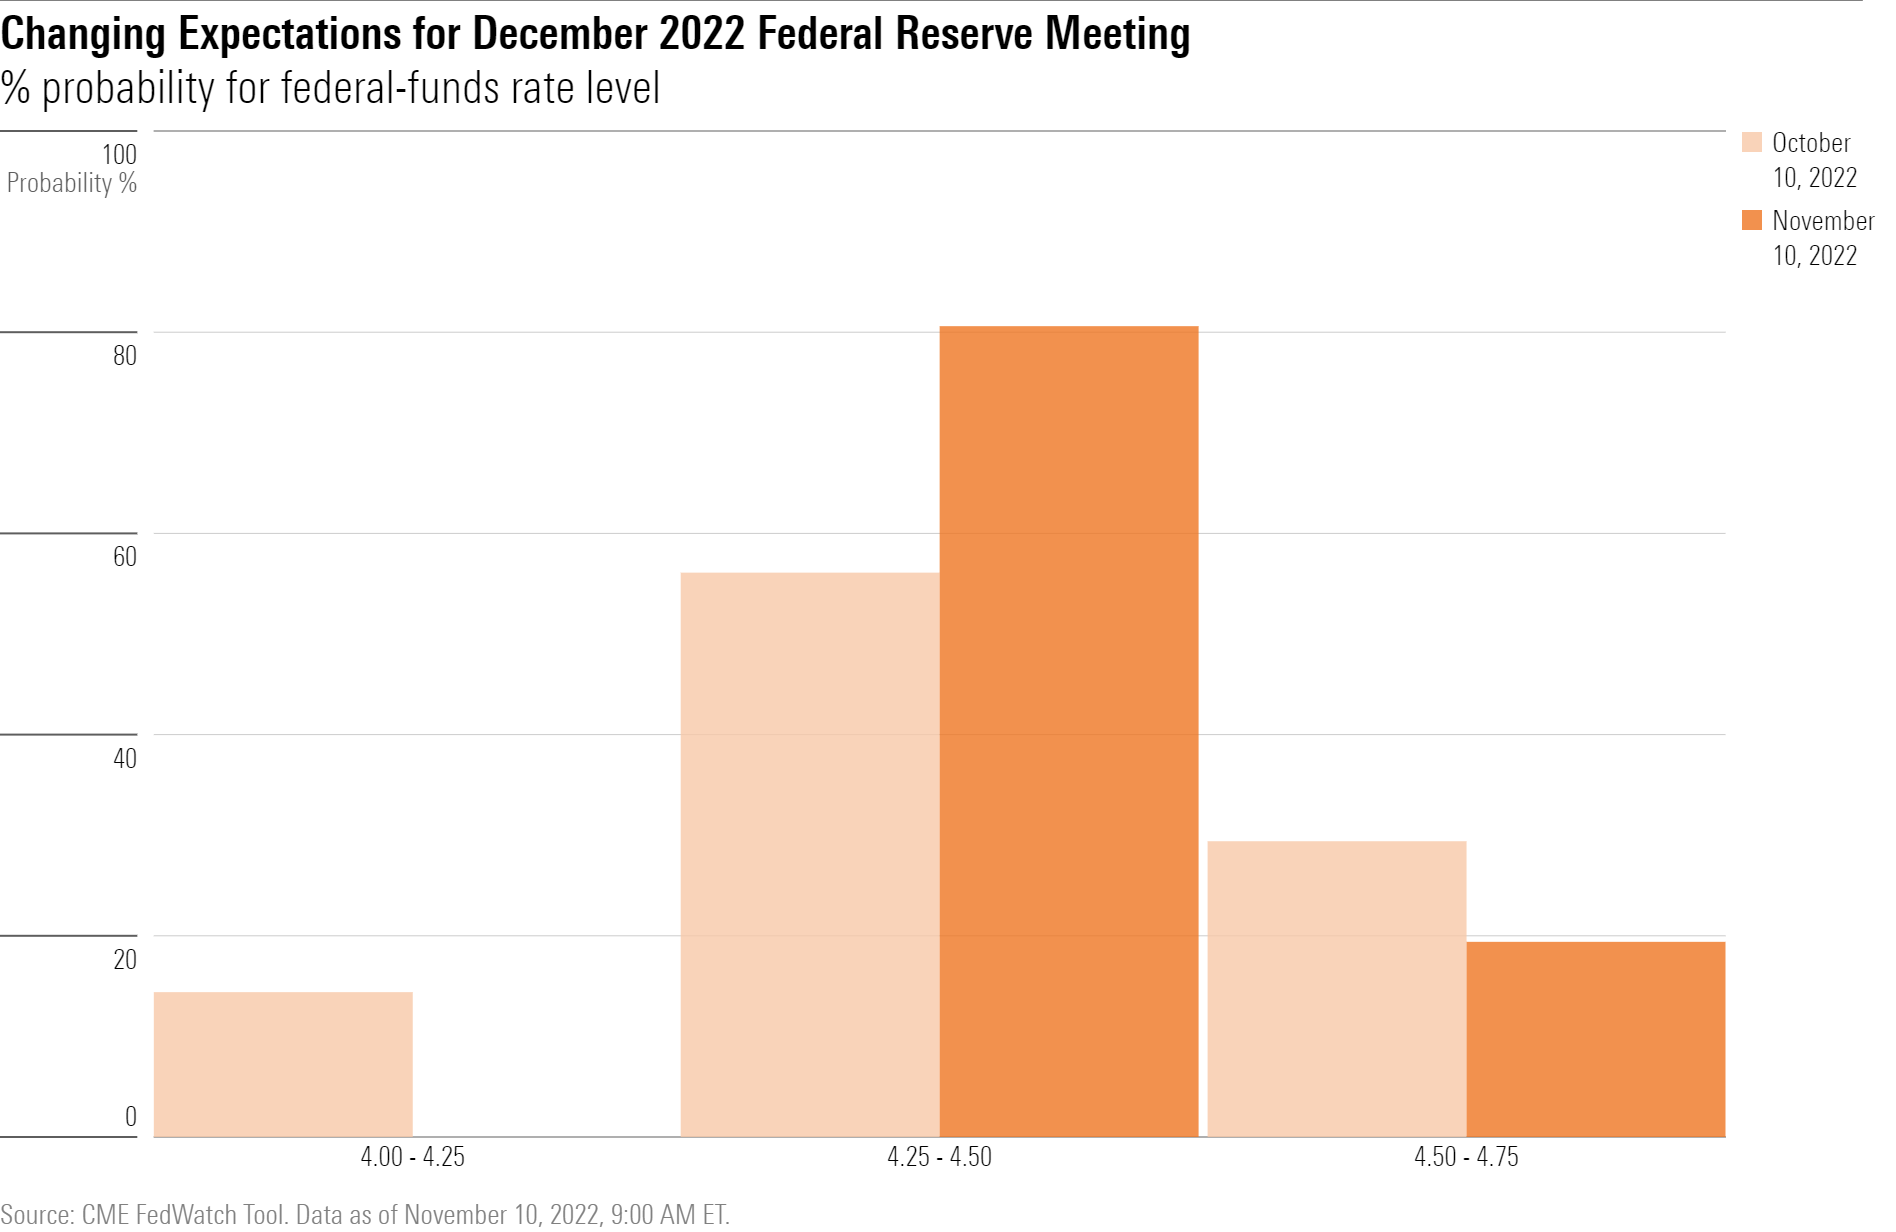 Bar chart showing probability for federal-funds rate levels.